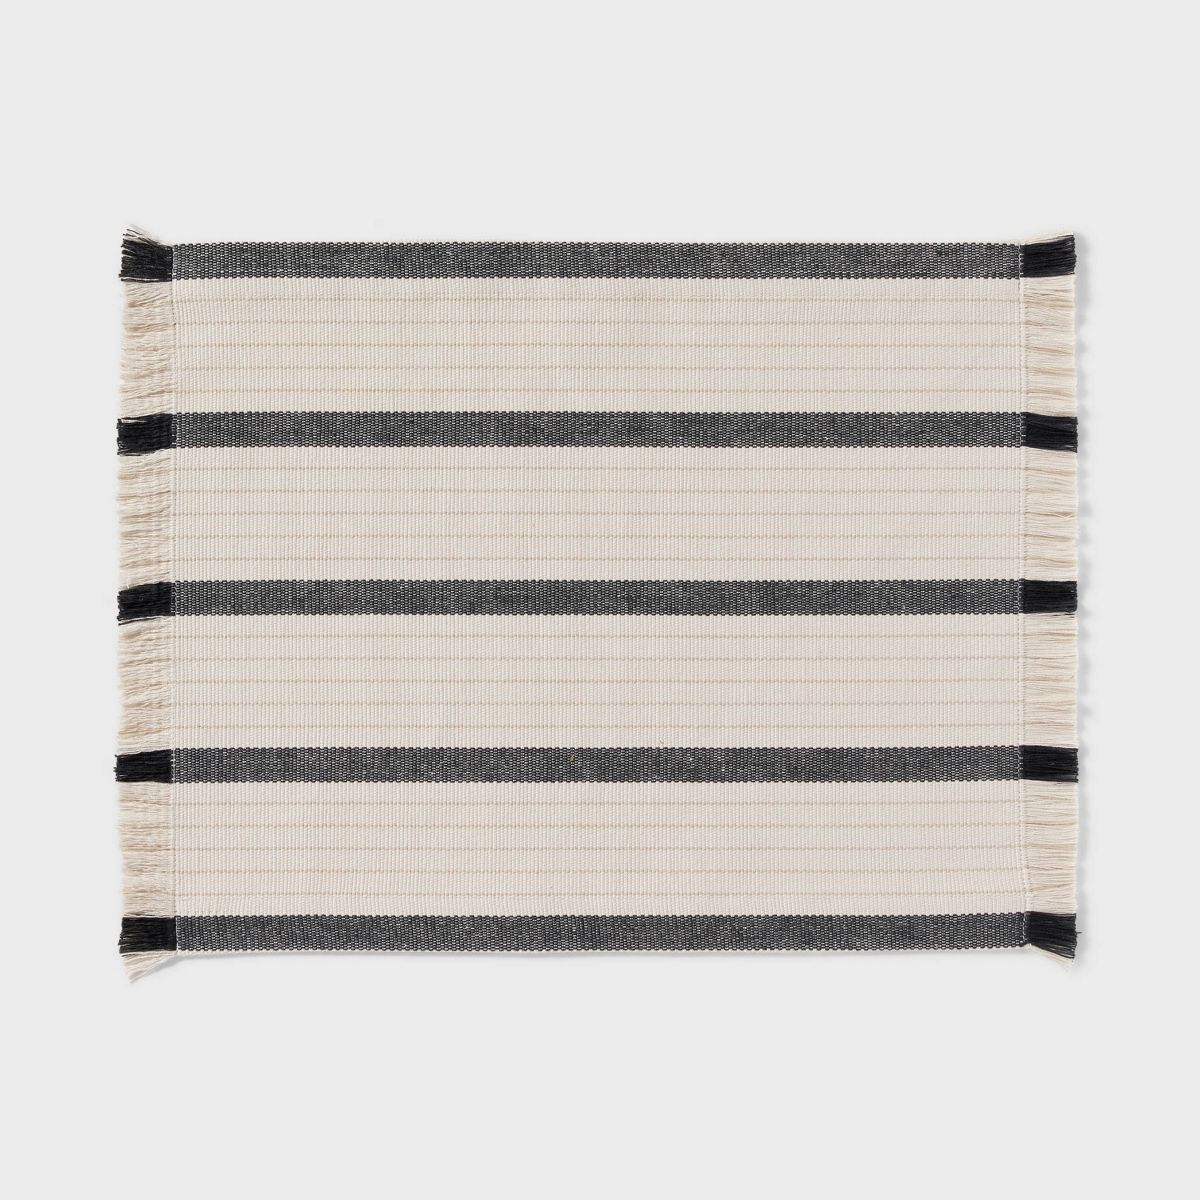 14"x19" 2pk Placemats with Modern Striped Black - Threshold™ | Target